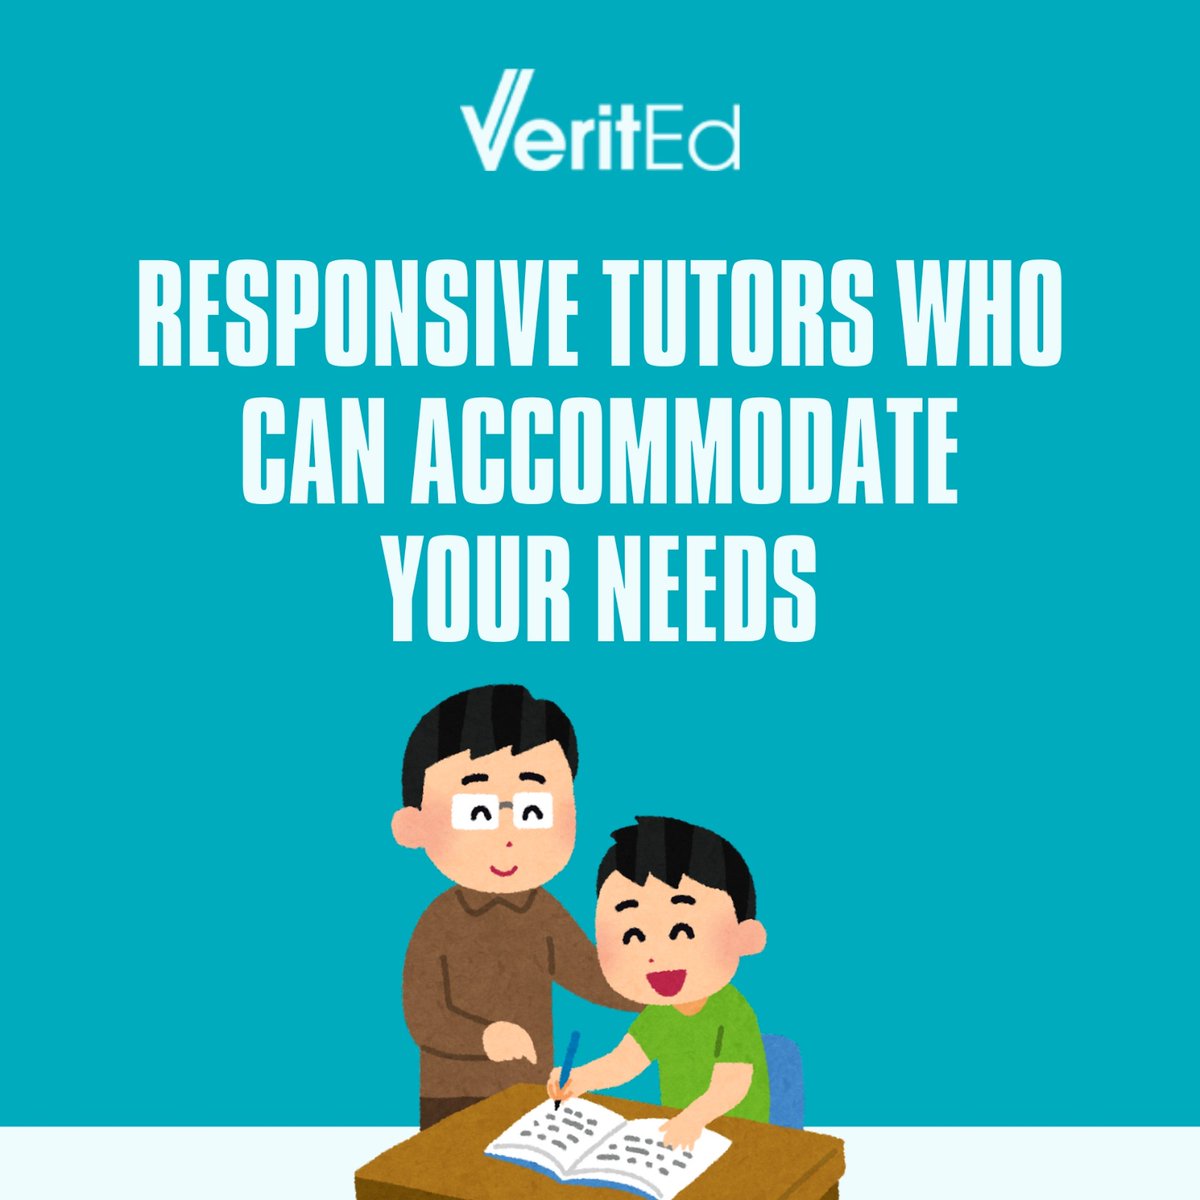 Empower your learning journey with VeritEd. Discover the benefits of responsive tutoring tailored just for you! 🌟🎓
.
.
#VeritEd #ElevateEducation #PersonalizedTutoring #Mentorship #HighAchievers #QualityEducation #AffordableTutoring #AcademicExcellence